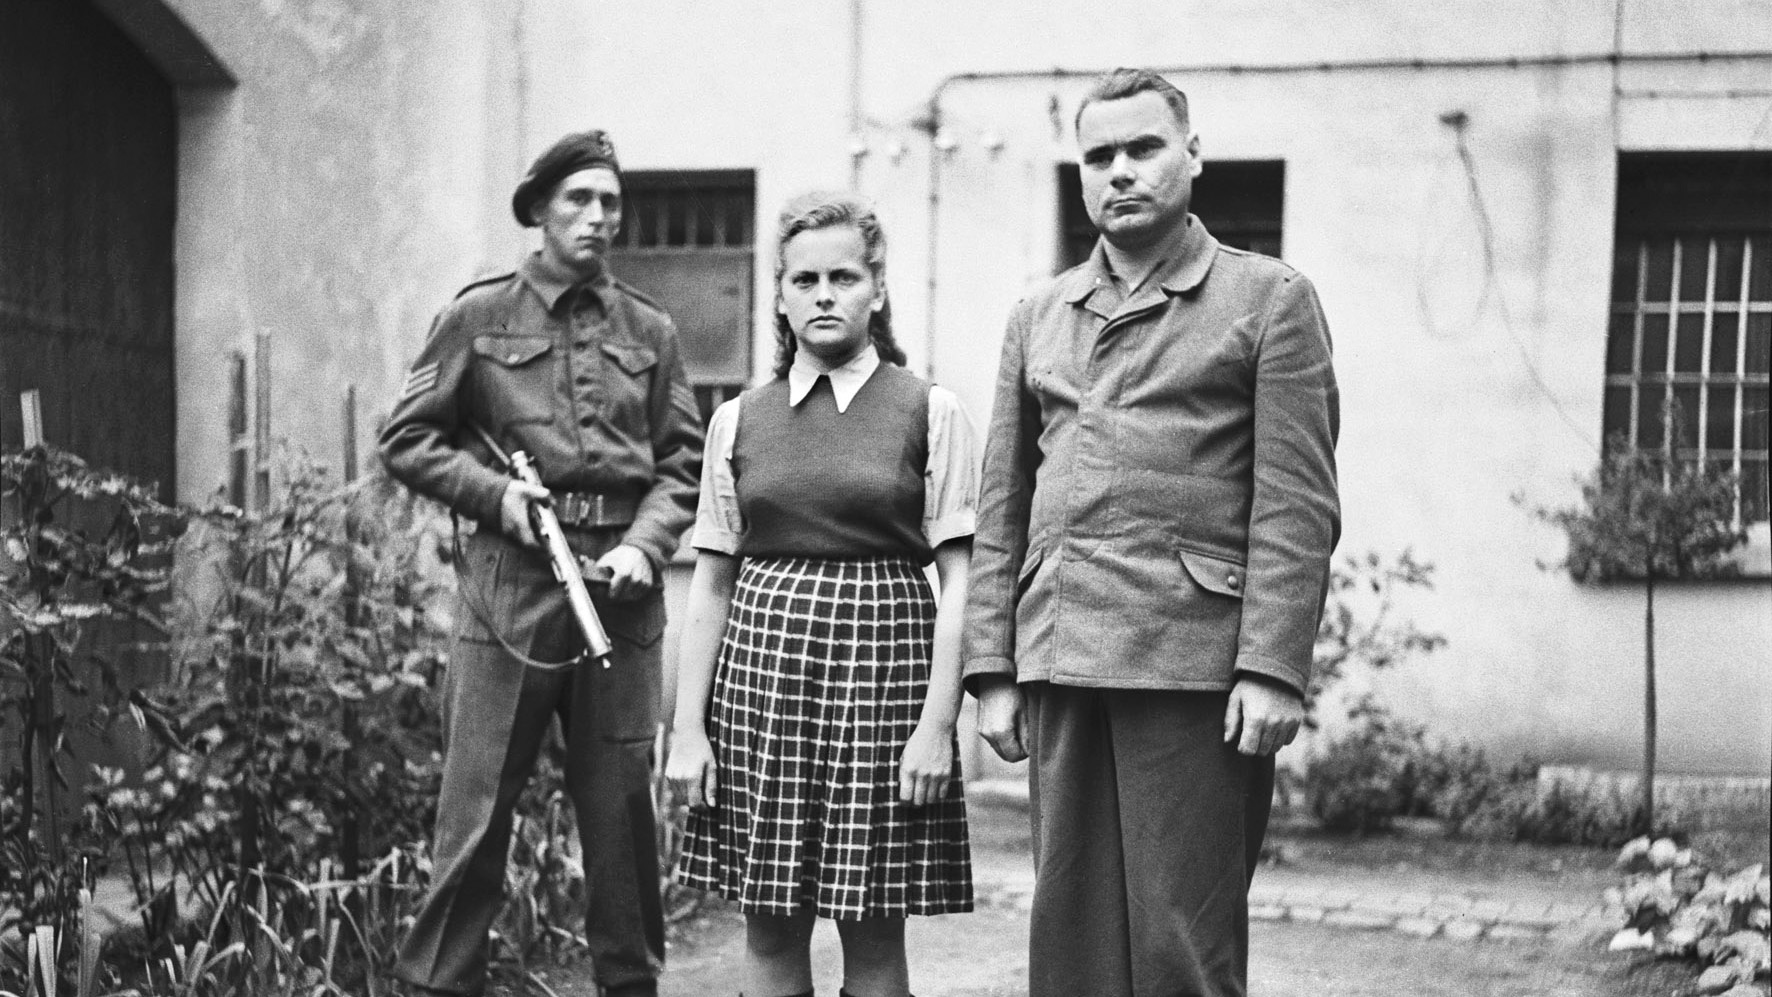 In jackboots and civilian clothes, Irma Grese (along with Bergen-Belsen commandant Josef Kramer, right) stands in the courtyard of the prison at Celle during their war-crimes trial, June 1945.